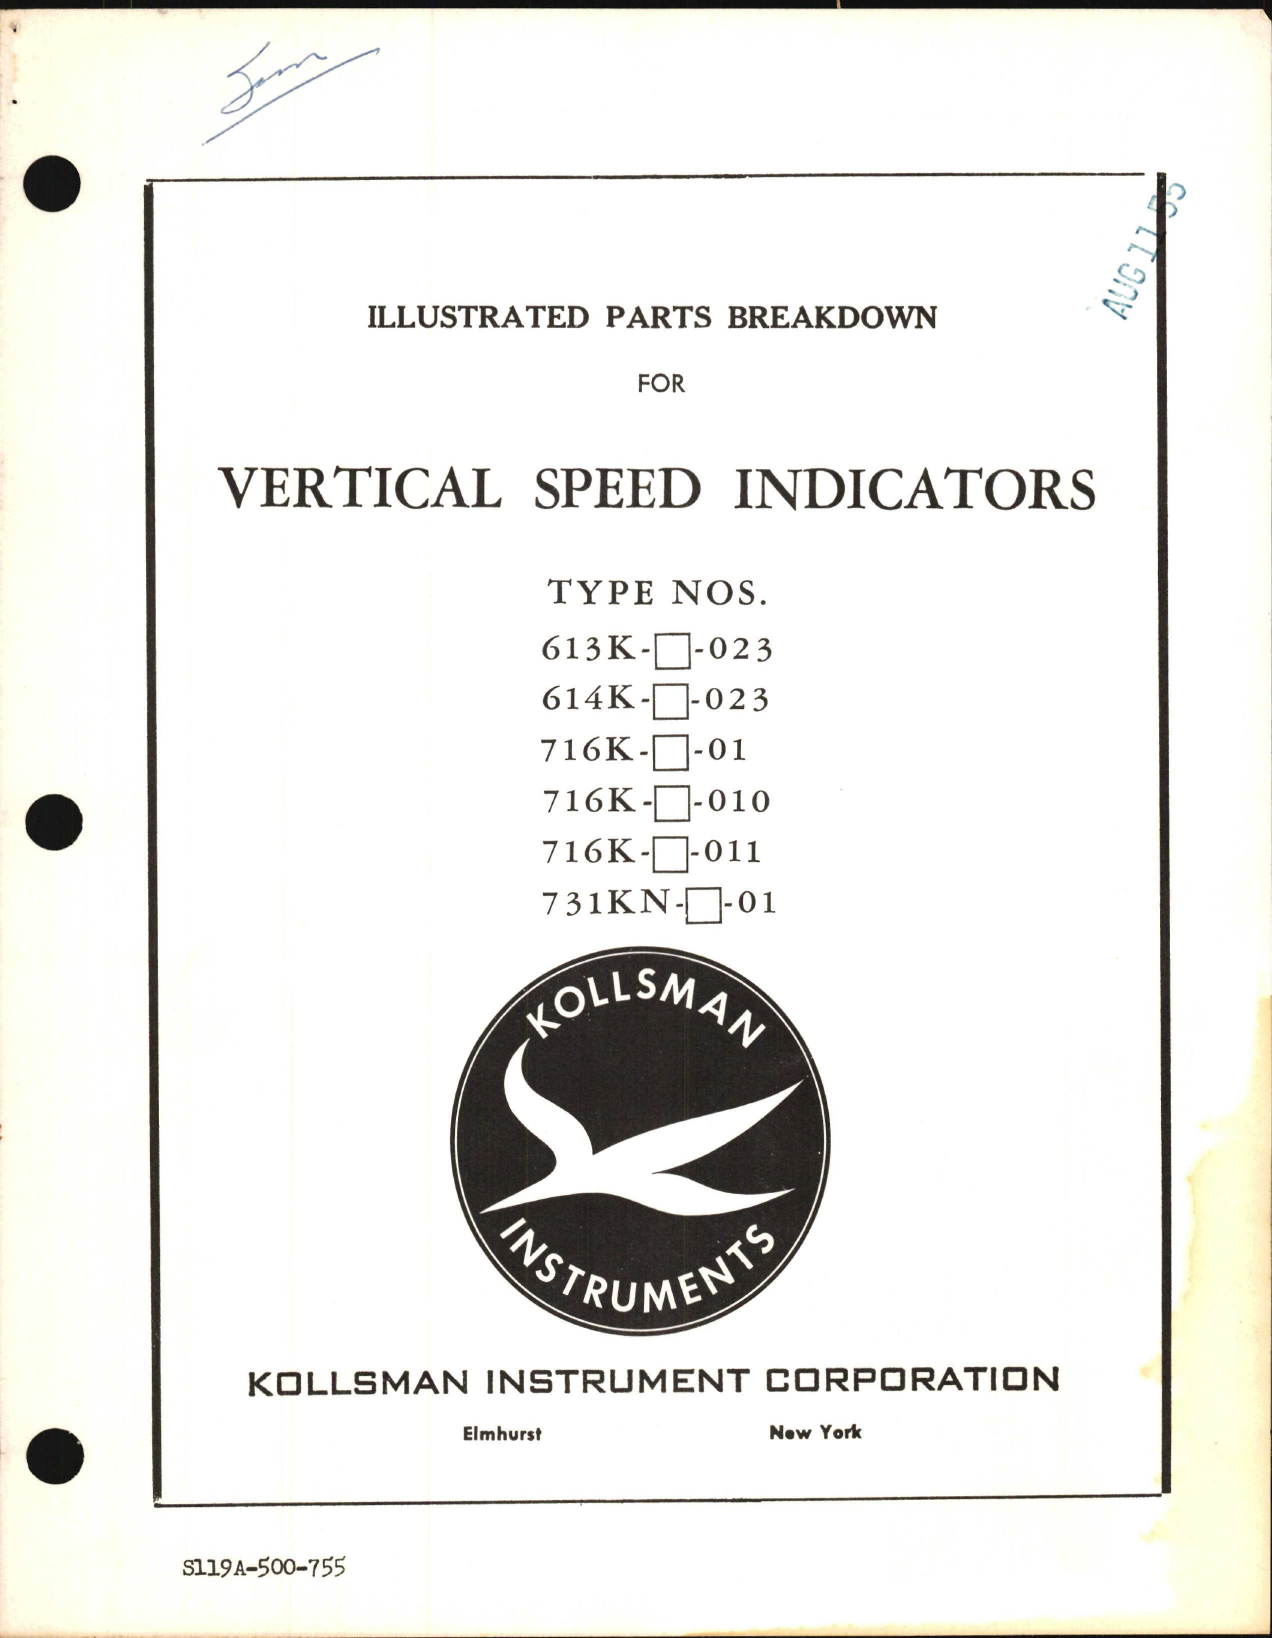 Sample page 1 from AirCorps Library document: Illustrated Parts Breakdown for Kollsman Vertical Speed Indicators